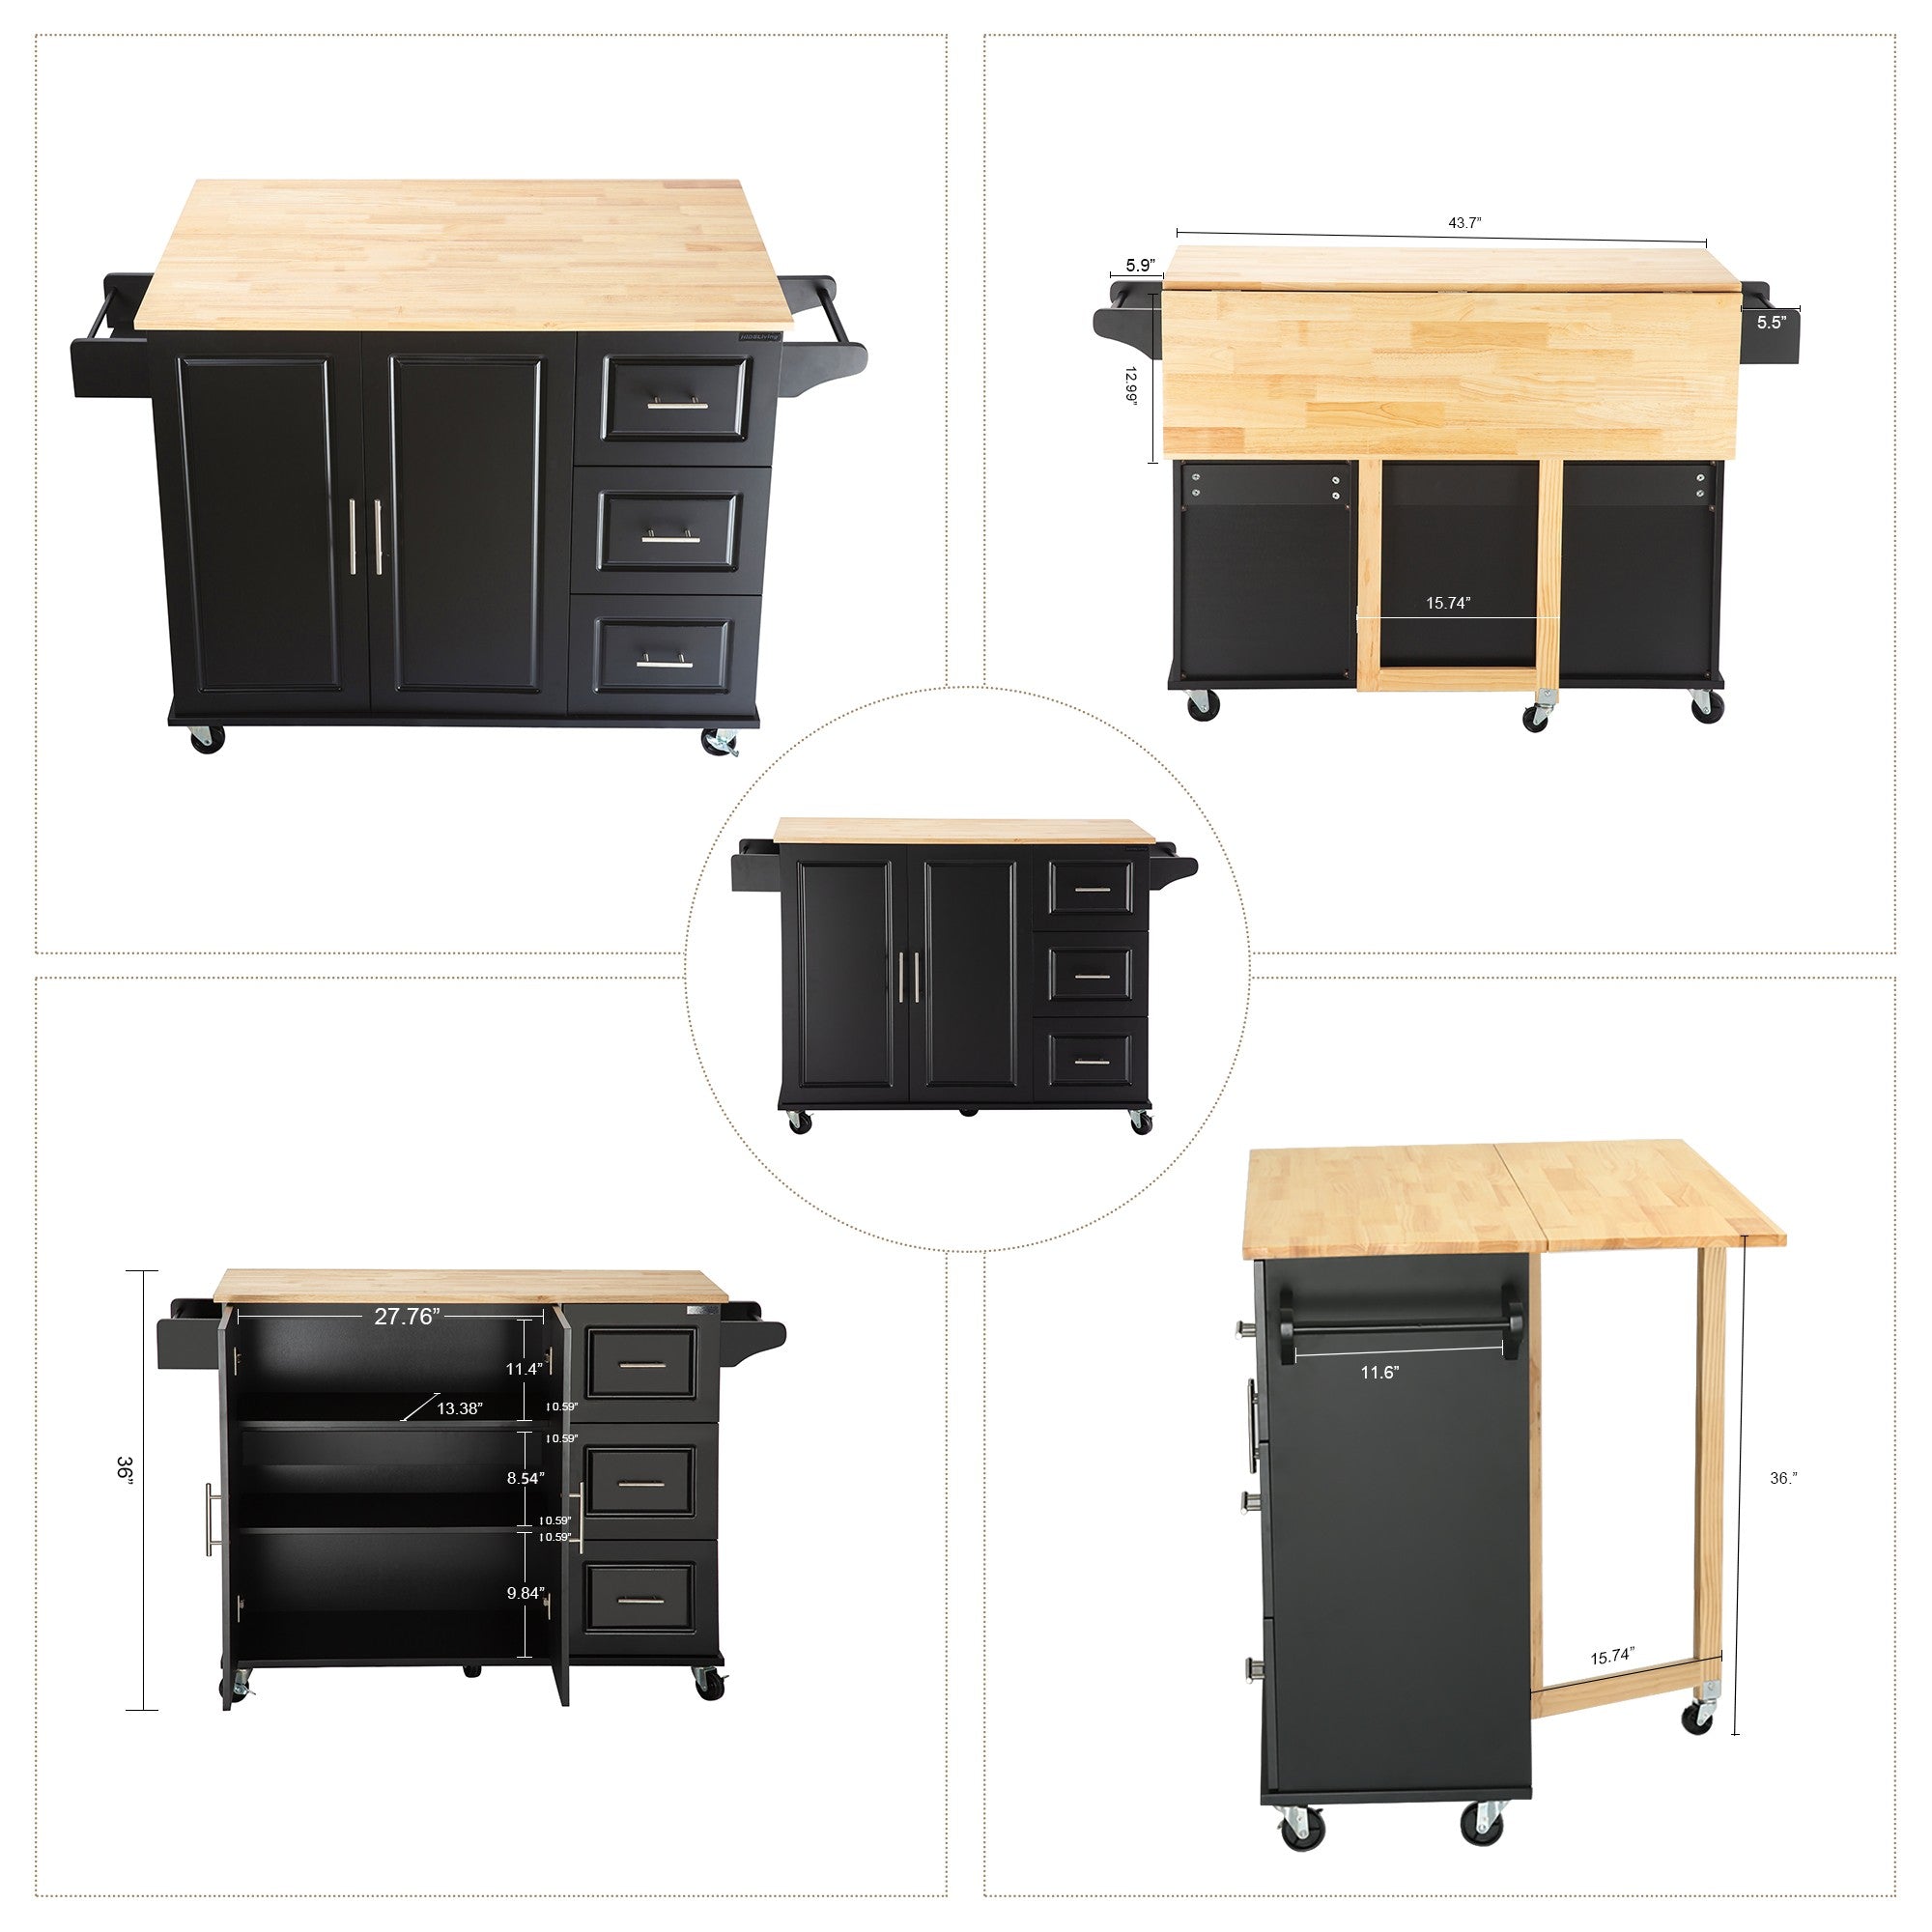 Kitchen Island & Kitchen Cart Mobile Kitehcn Island with Extensible Rubber Wood Table Top